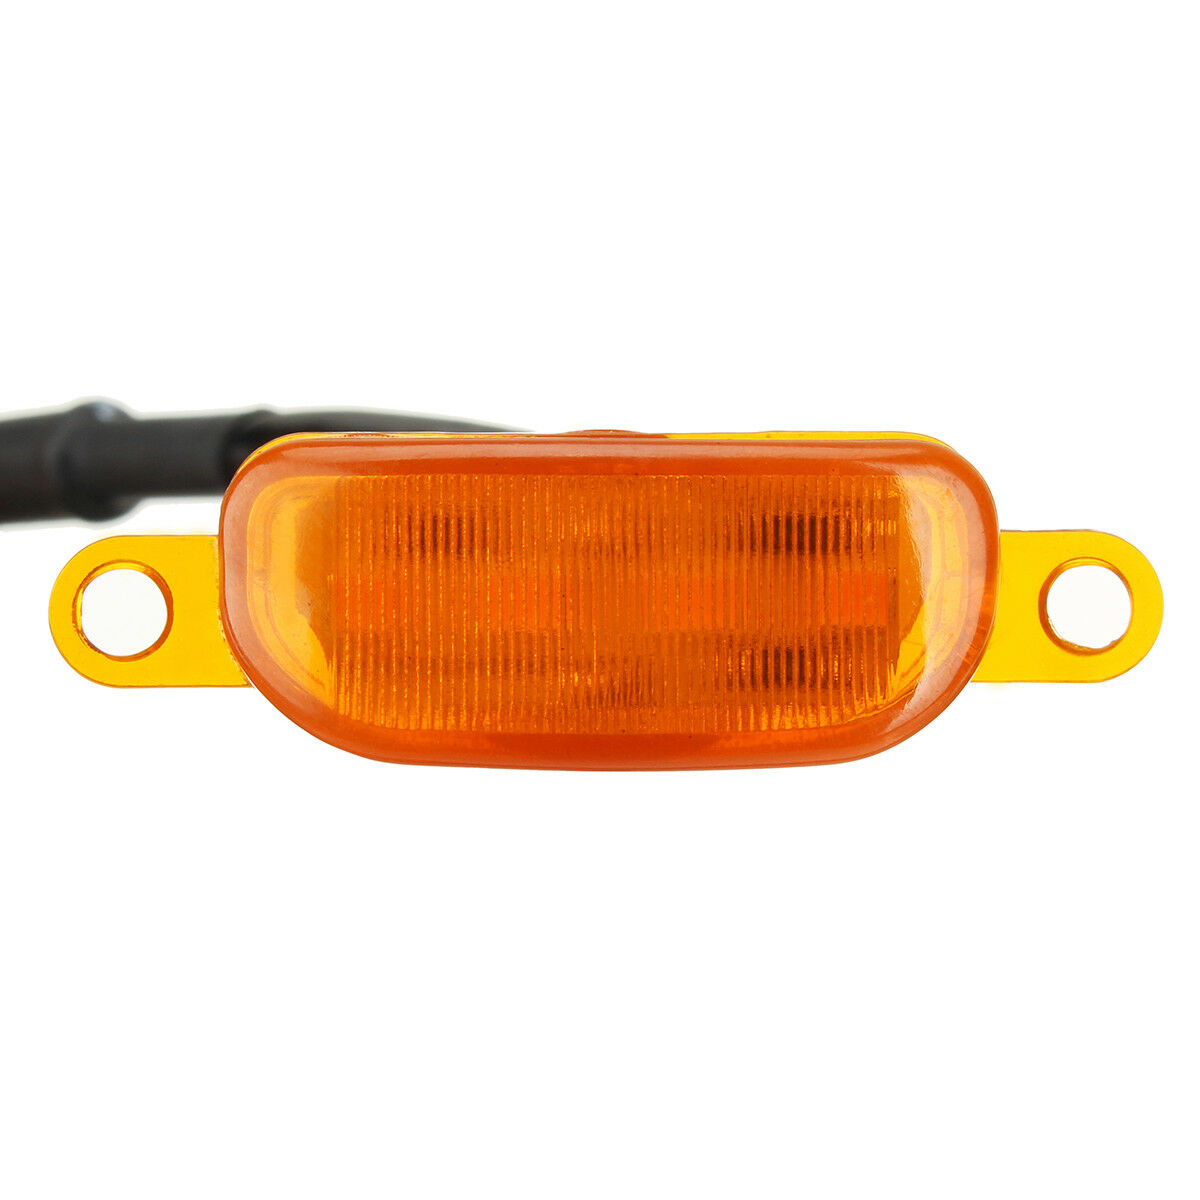 Find Front Bumper Grille LED Light Warning Signal Light Grill For Ford Raptor Style F-150 F150  for Sale on Gipsybee.com with cryptocurrencies